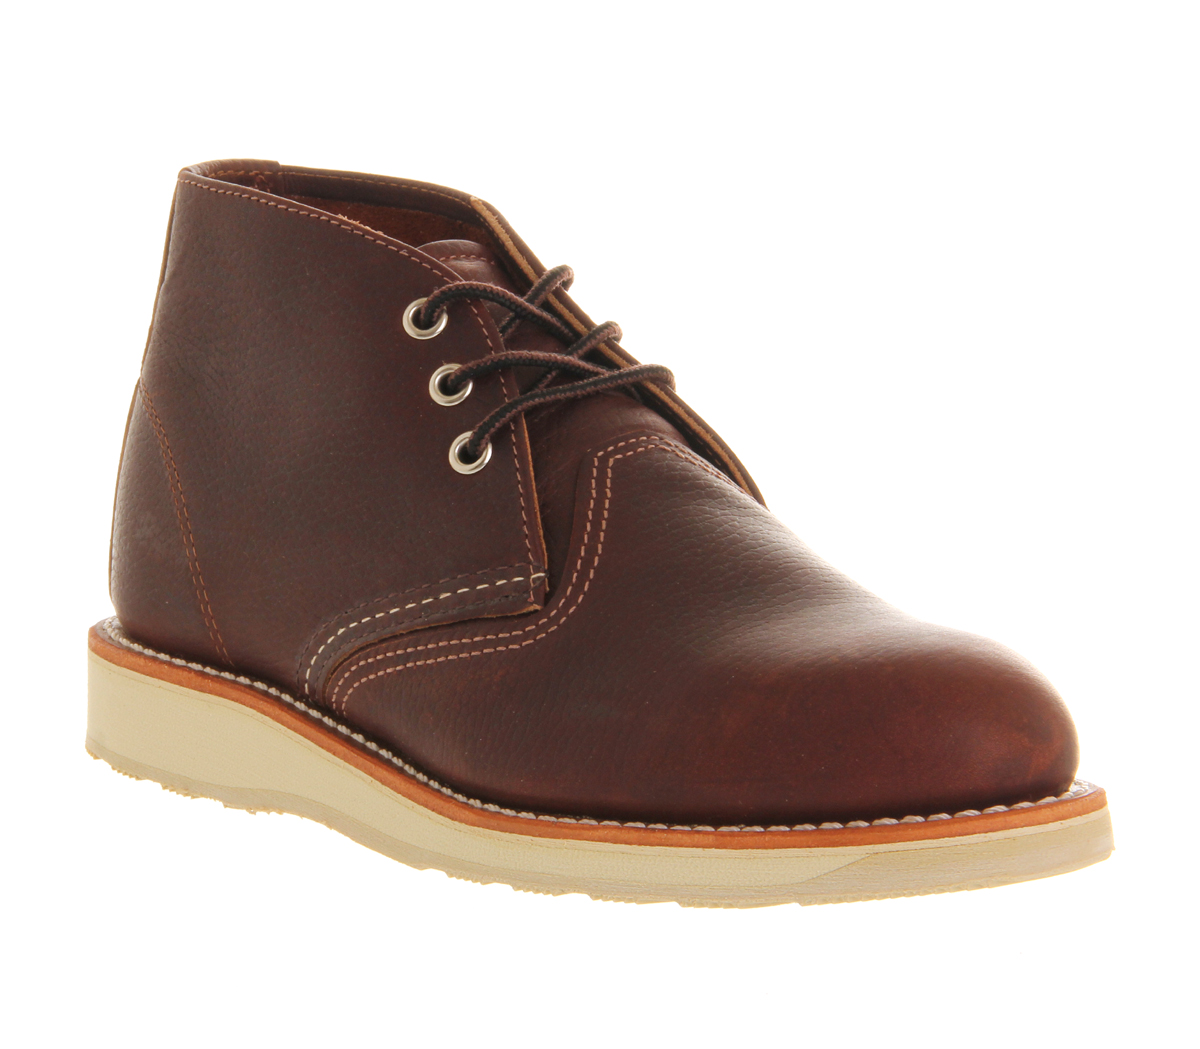 Redwing Chukka boots Dark Brown Leather - Ankle Boots